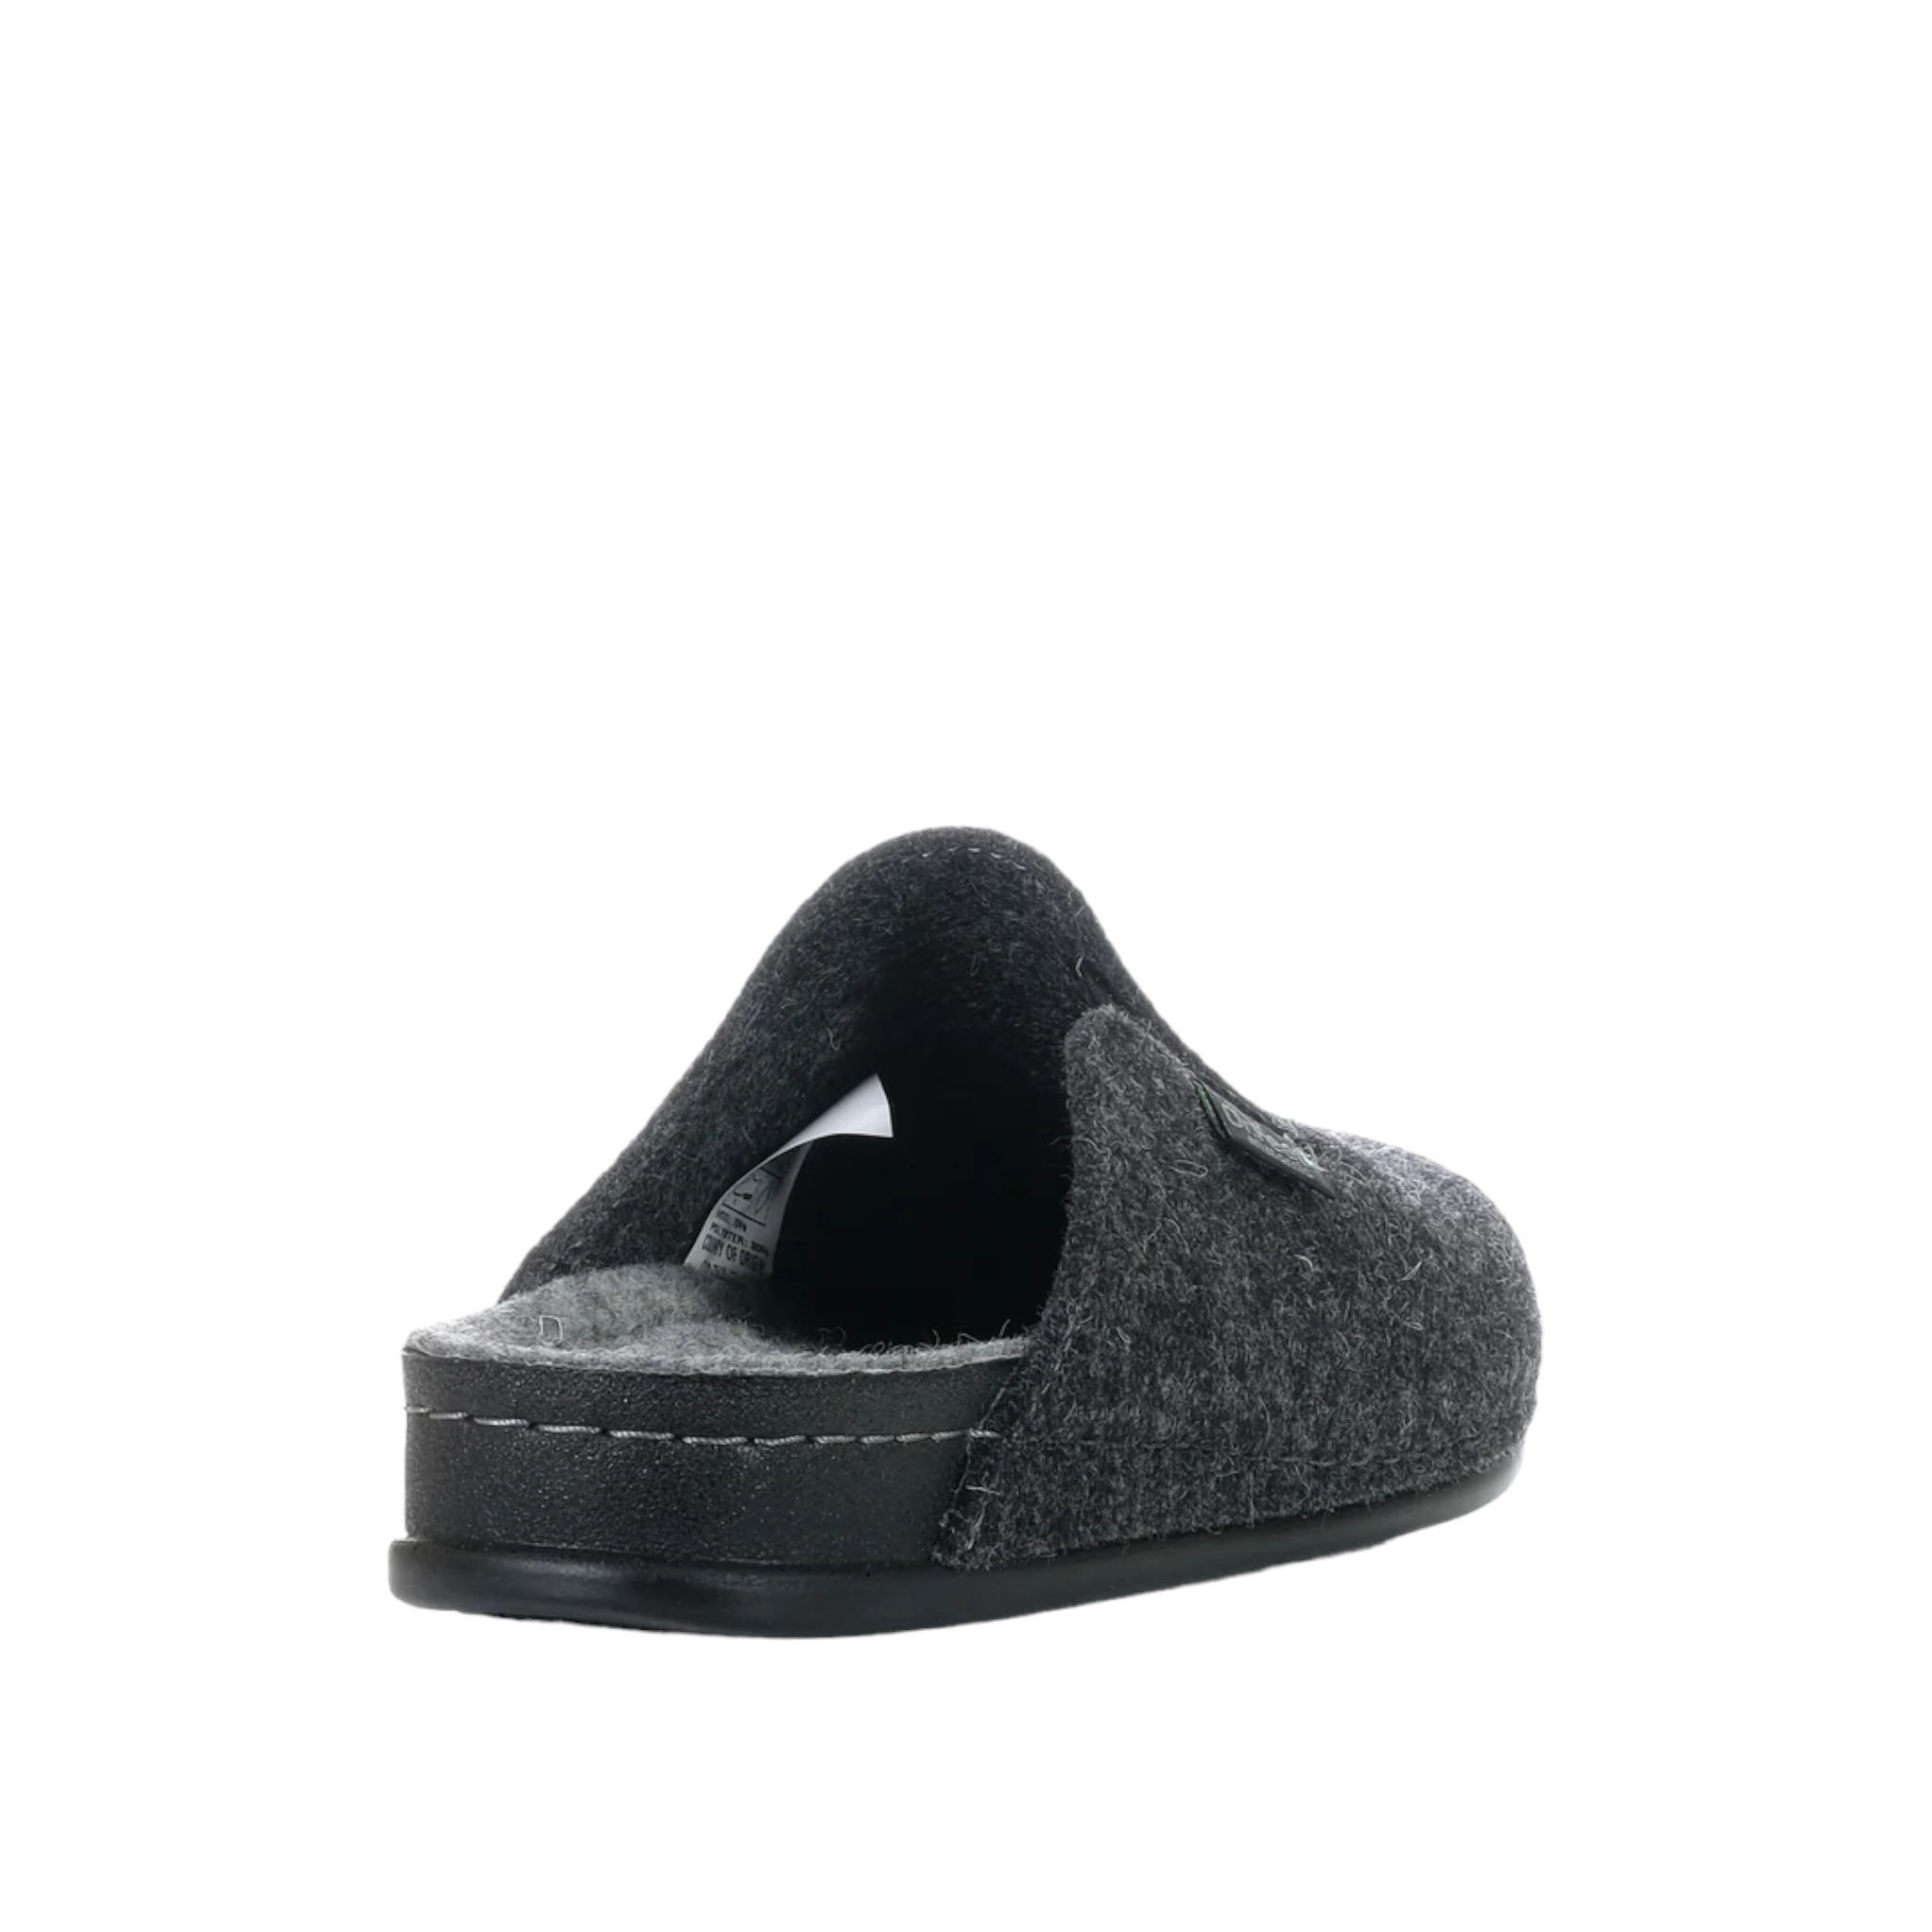 Shop Mens Felt Mule Slippers Online and In-store. Dark Grey felt with light grey inner sole. Slight Gusset on out side of upper. Shop Online and In-Store with shoe&me